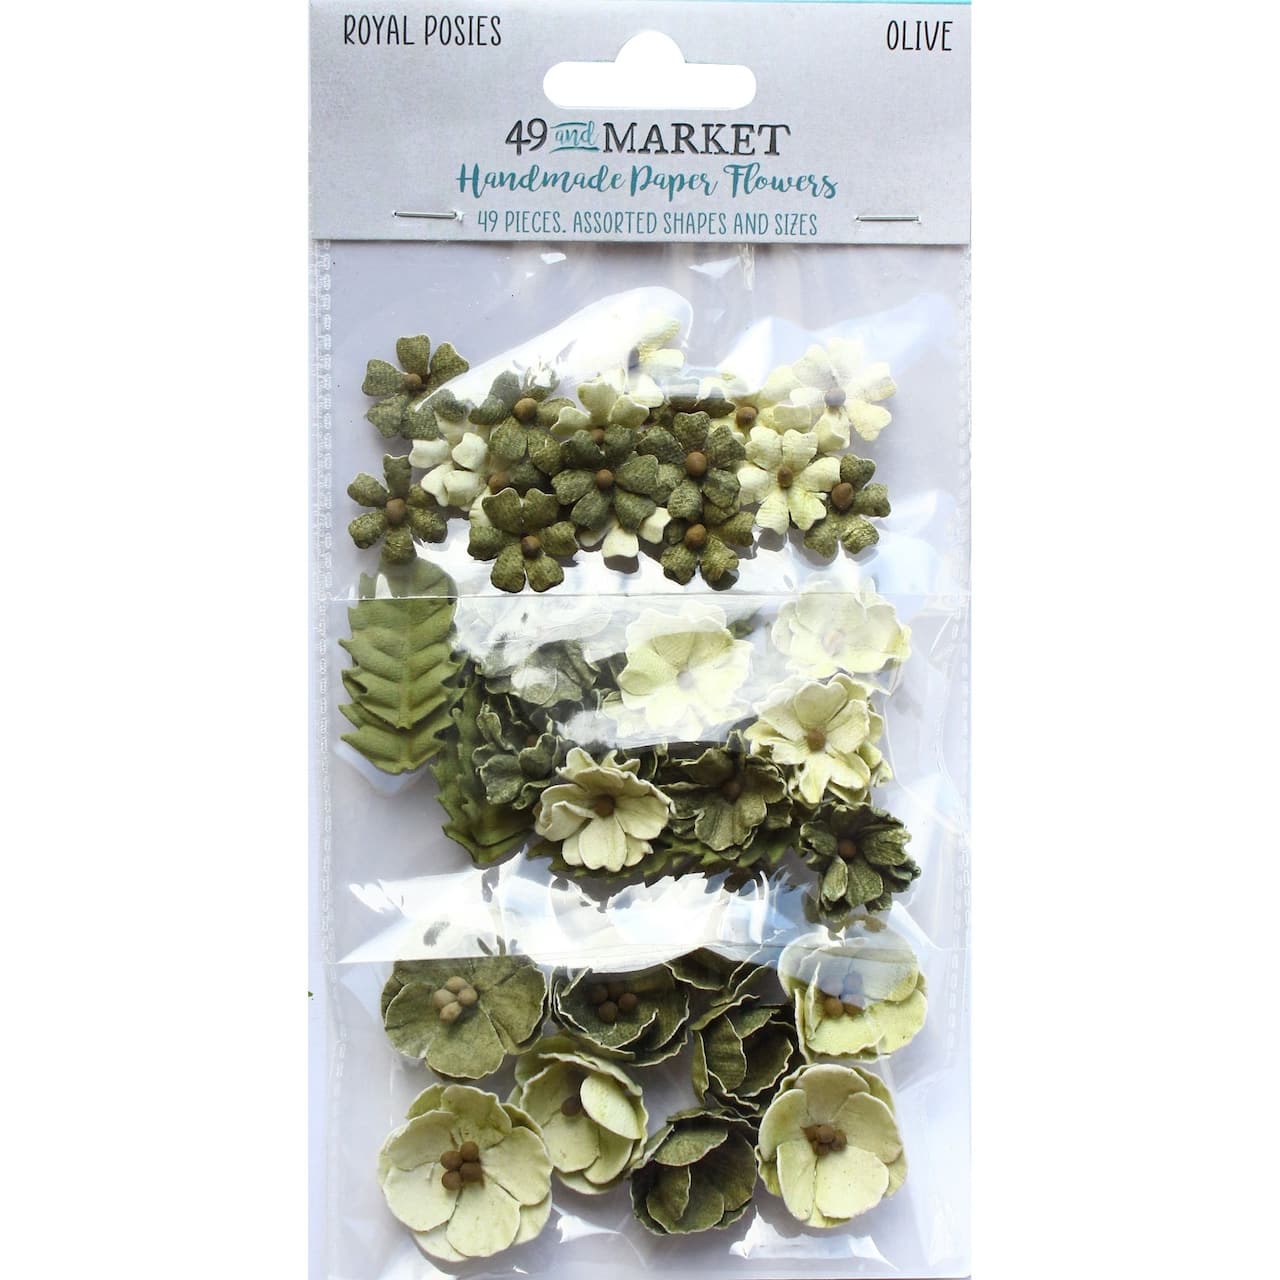 49 And Market Royal Posies Olive Paper Flowers